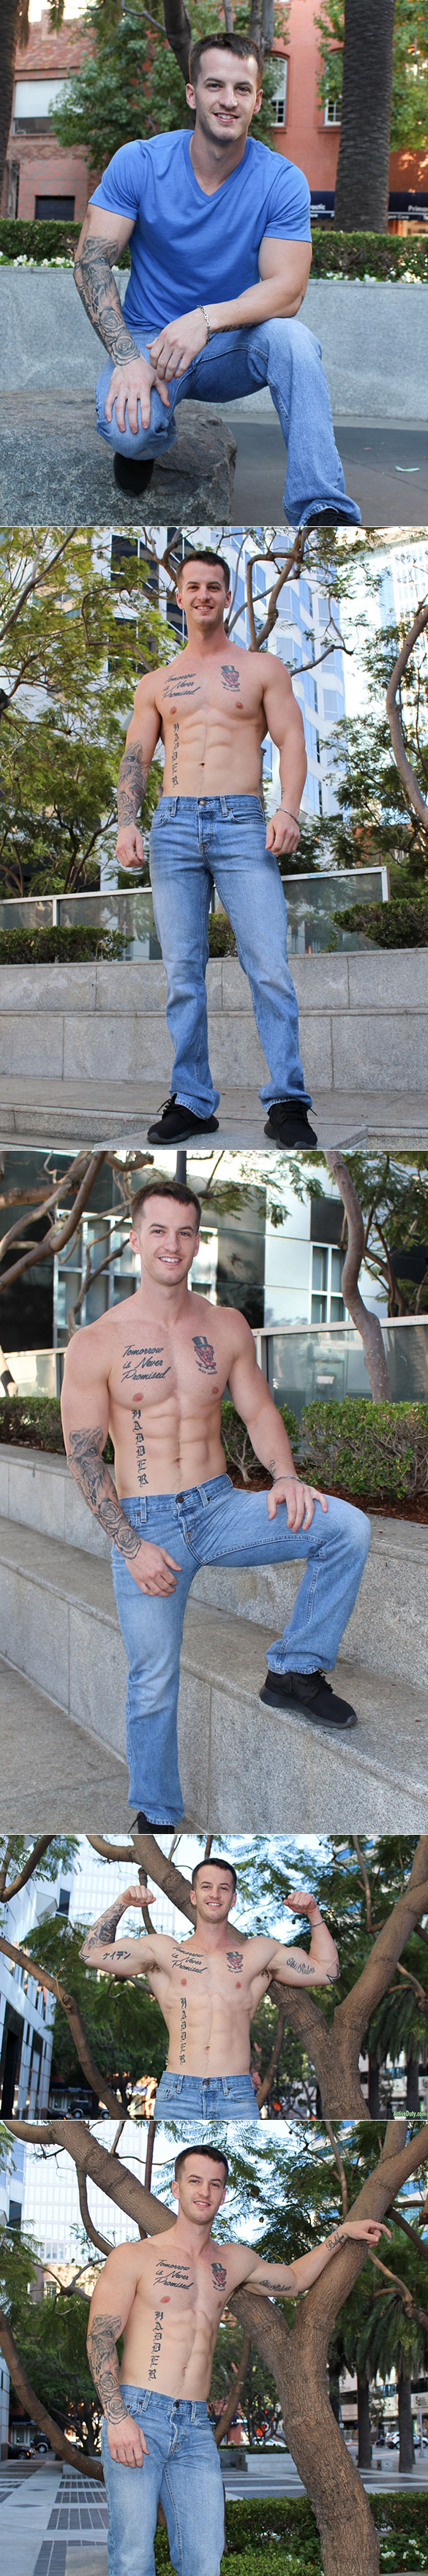 ActiveDuty: Quentin Gainz shows off his hot body and rides a giant dildo